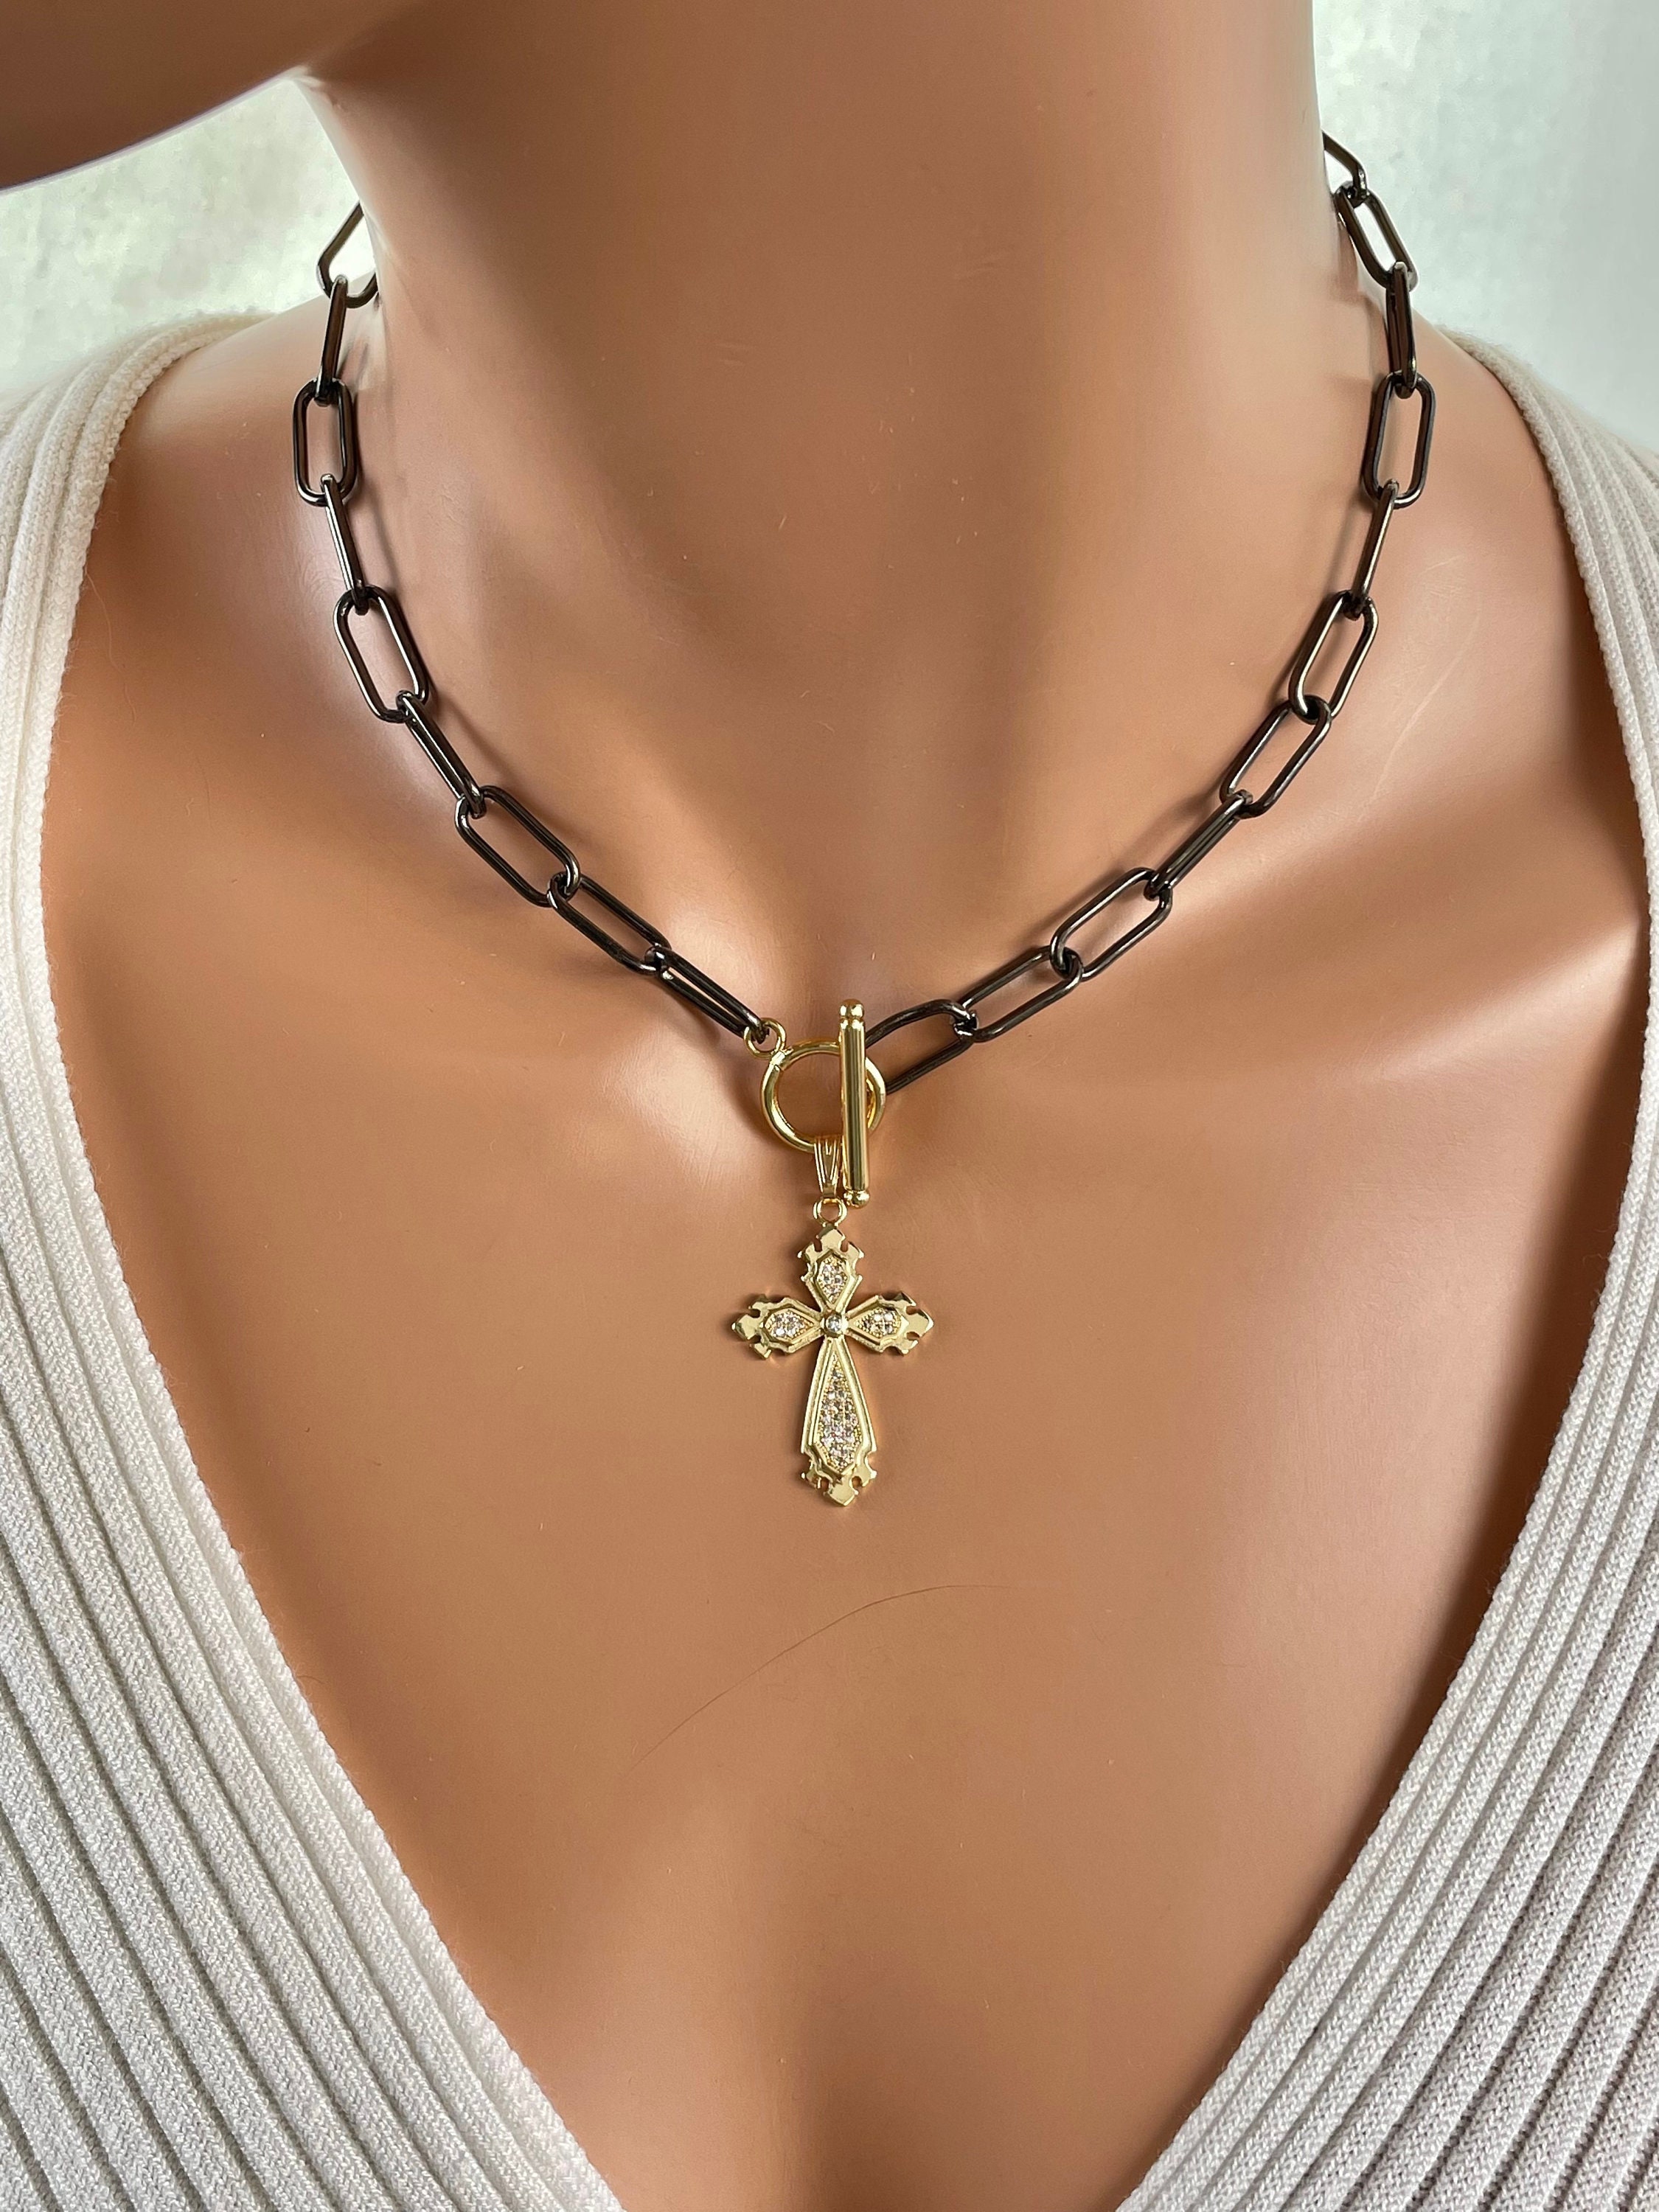 Sterling Silver Cross Necklace, Thick Cross Necklace, Unique Craft Cross  Pendant, Religious Necklace, First Holy Communion Necklace, LK8472 - Etsy